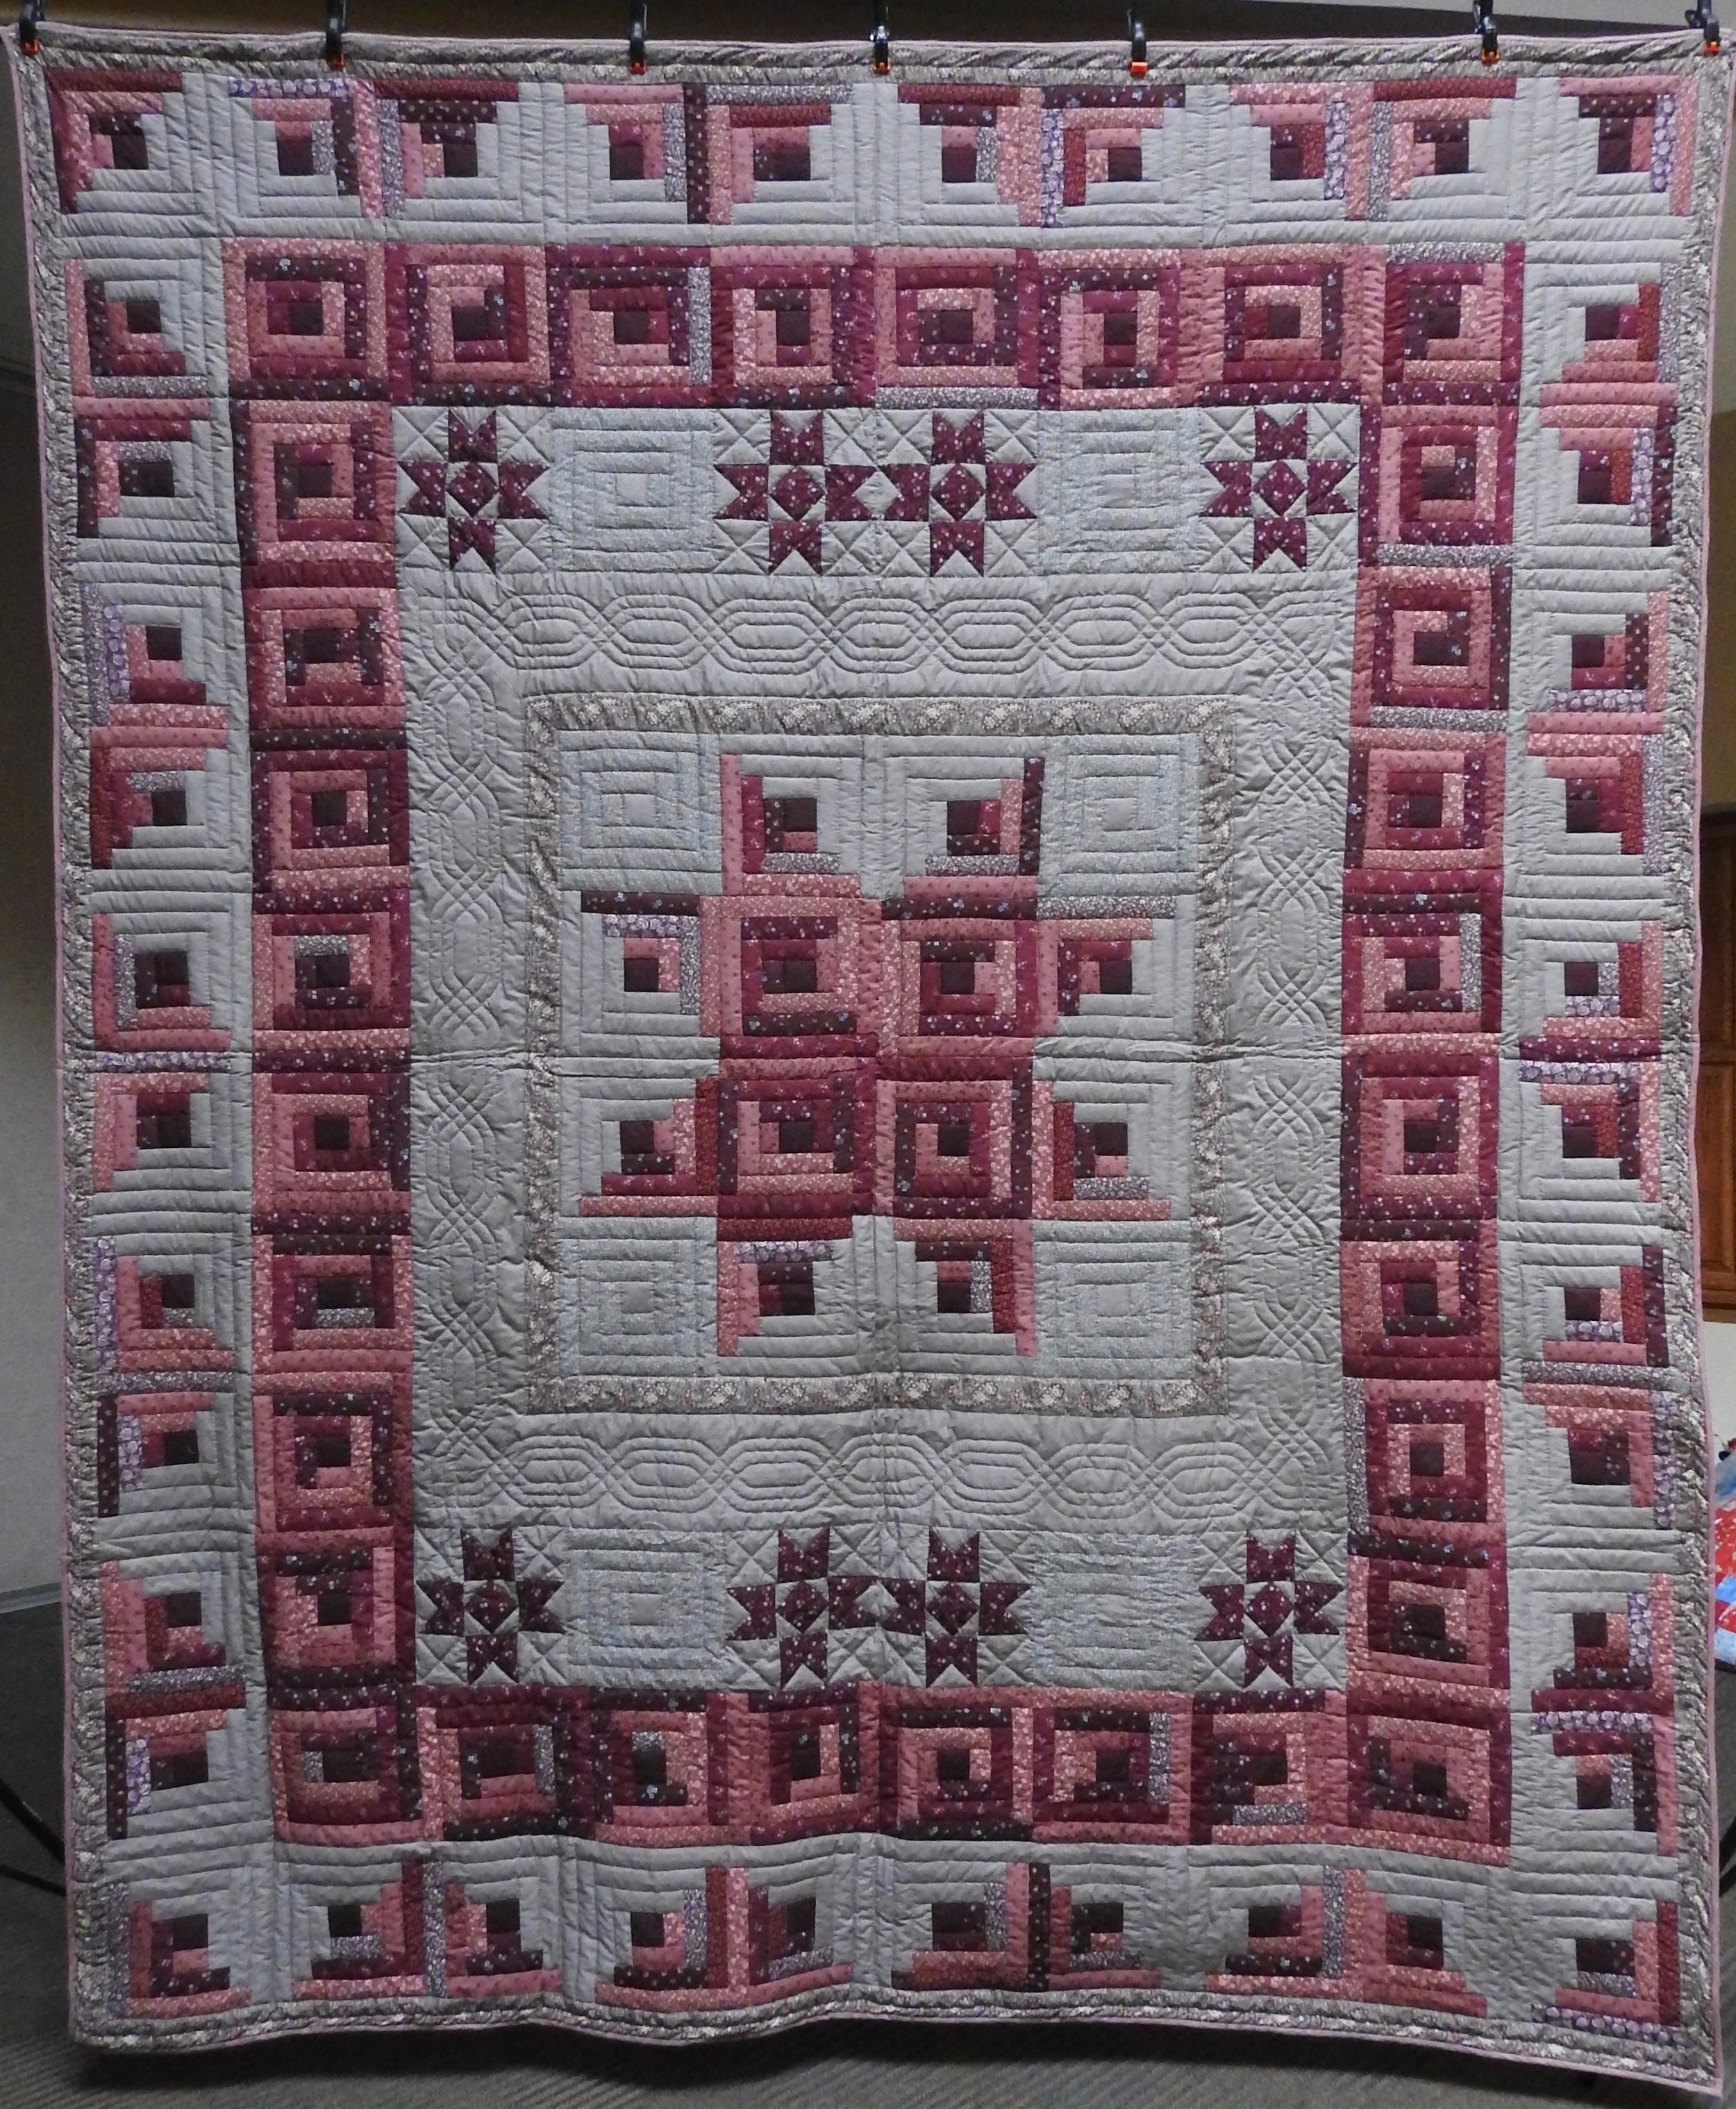  Stars over the Log Cabin, Pieced, Hand Quilted, donated by The Depot Quilt Room, 96 x 113”